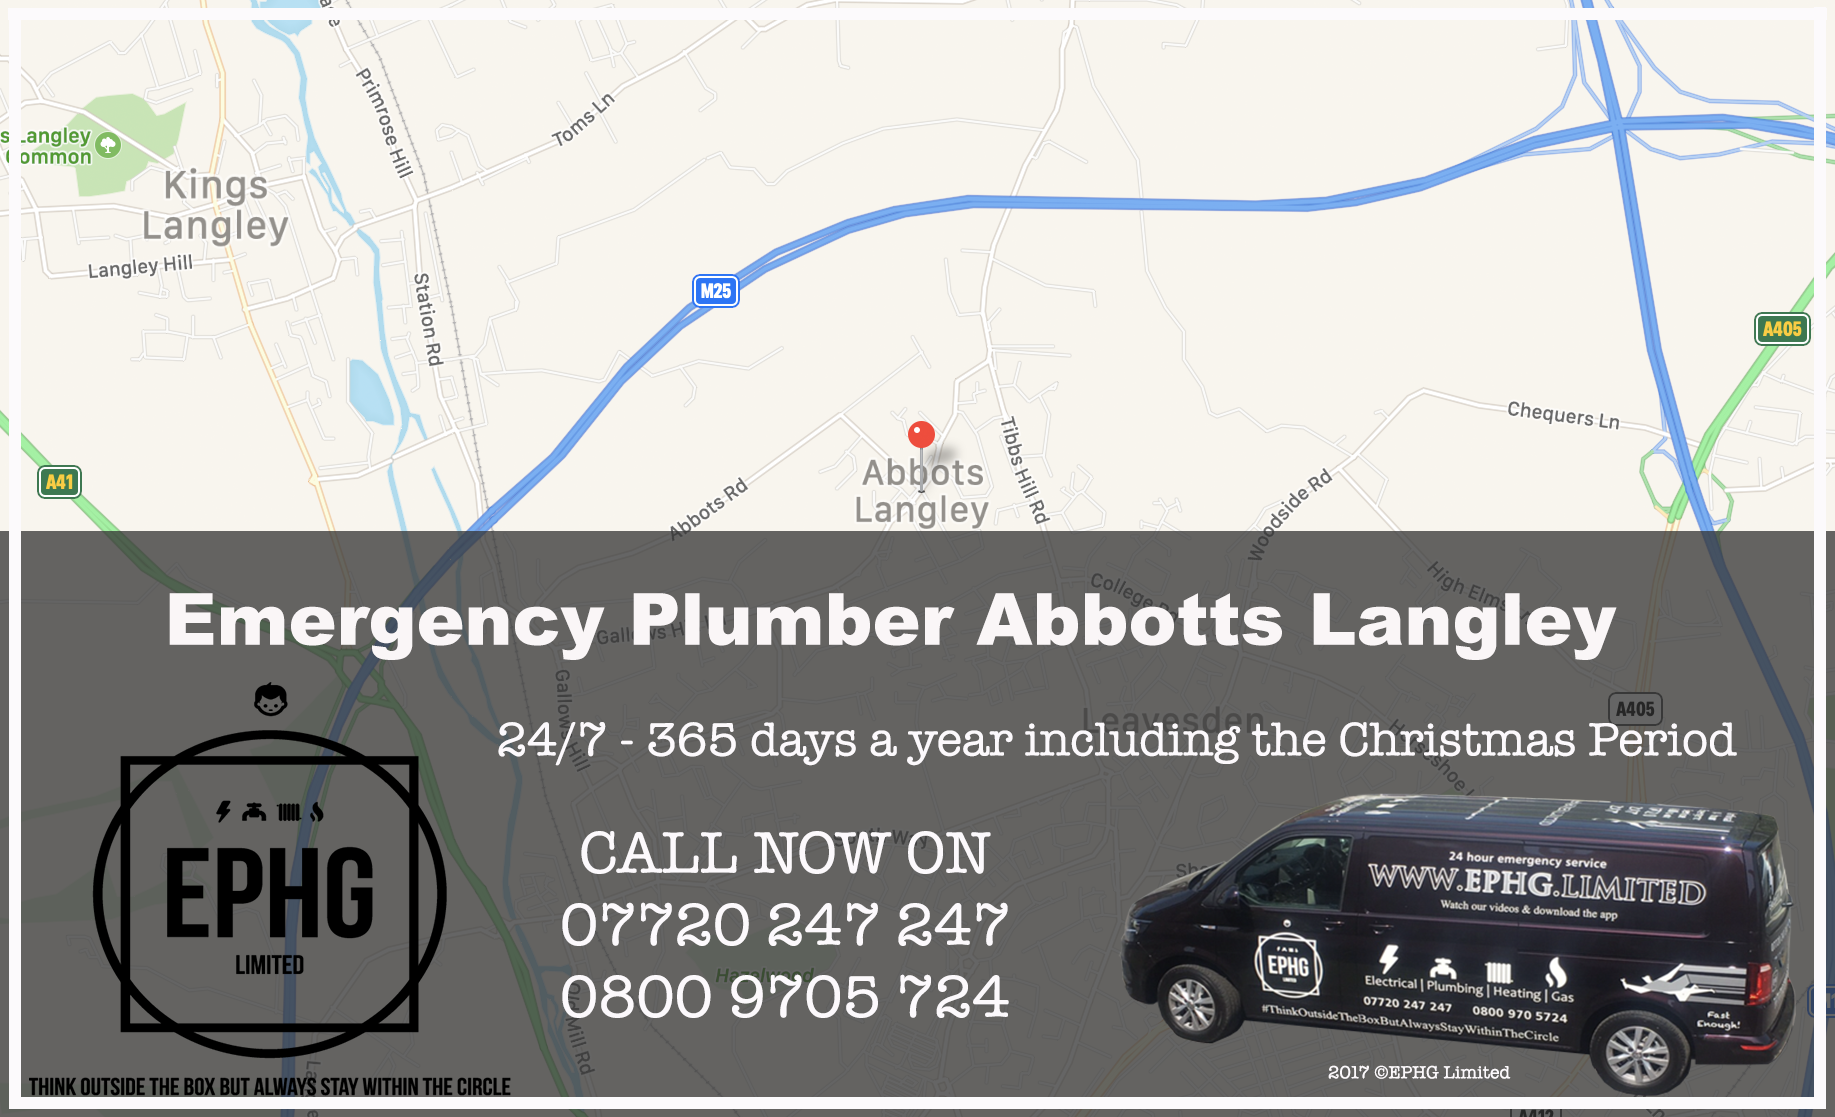 24 Hour Emergency Plumber Abbots Langley